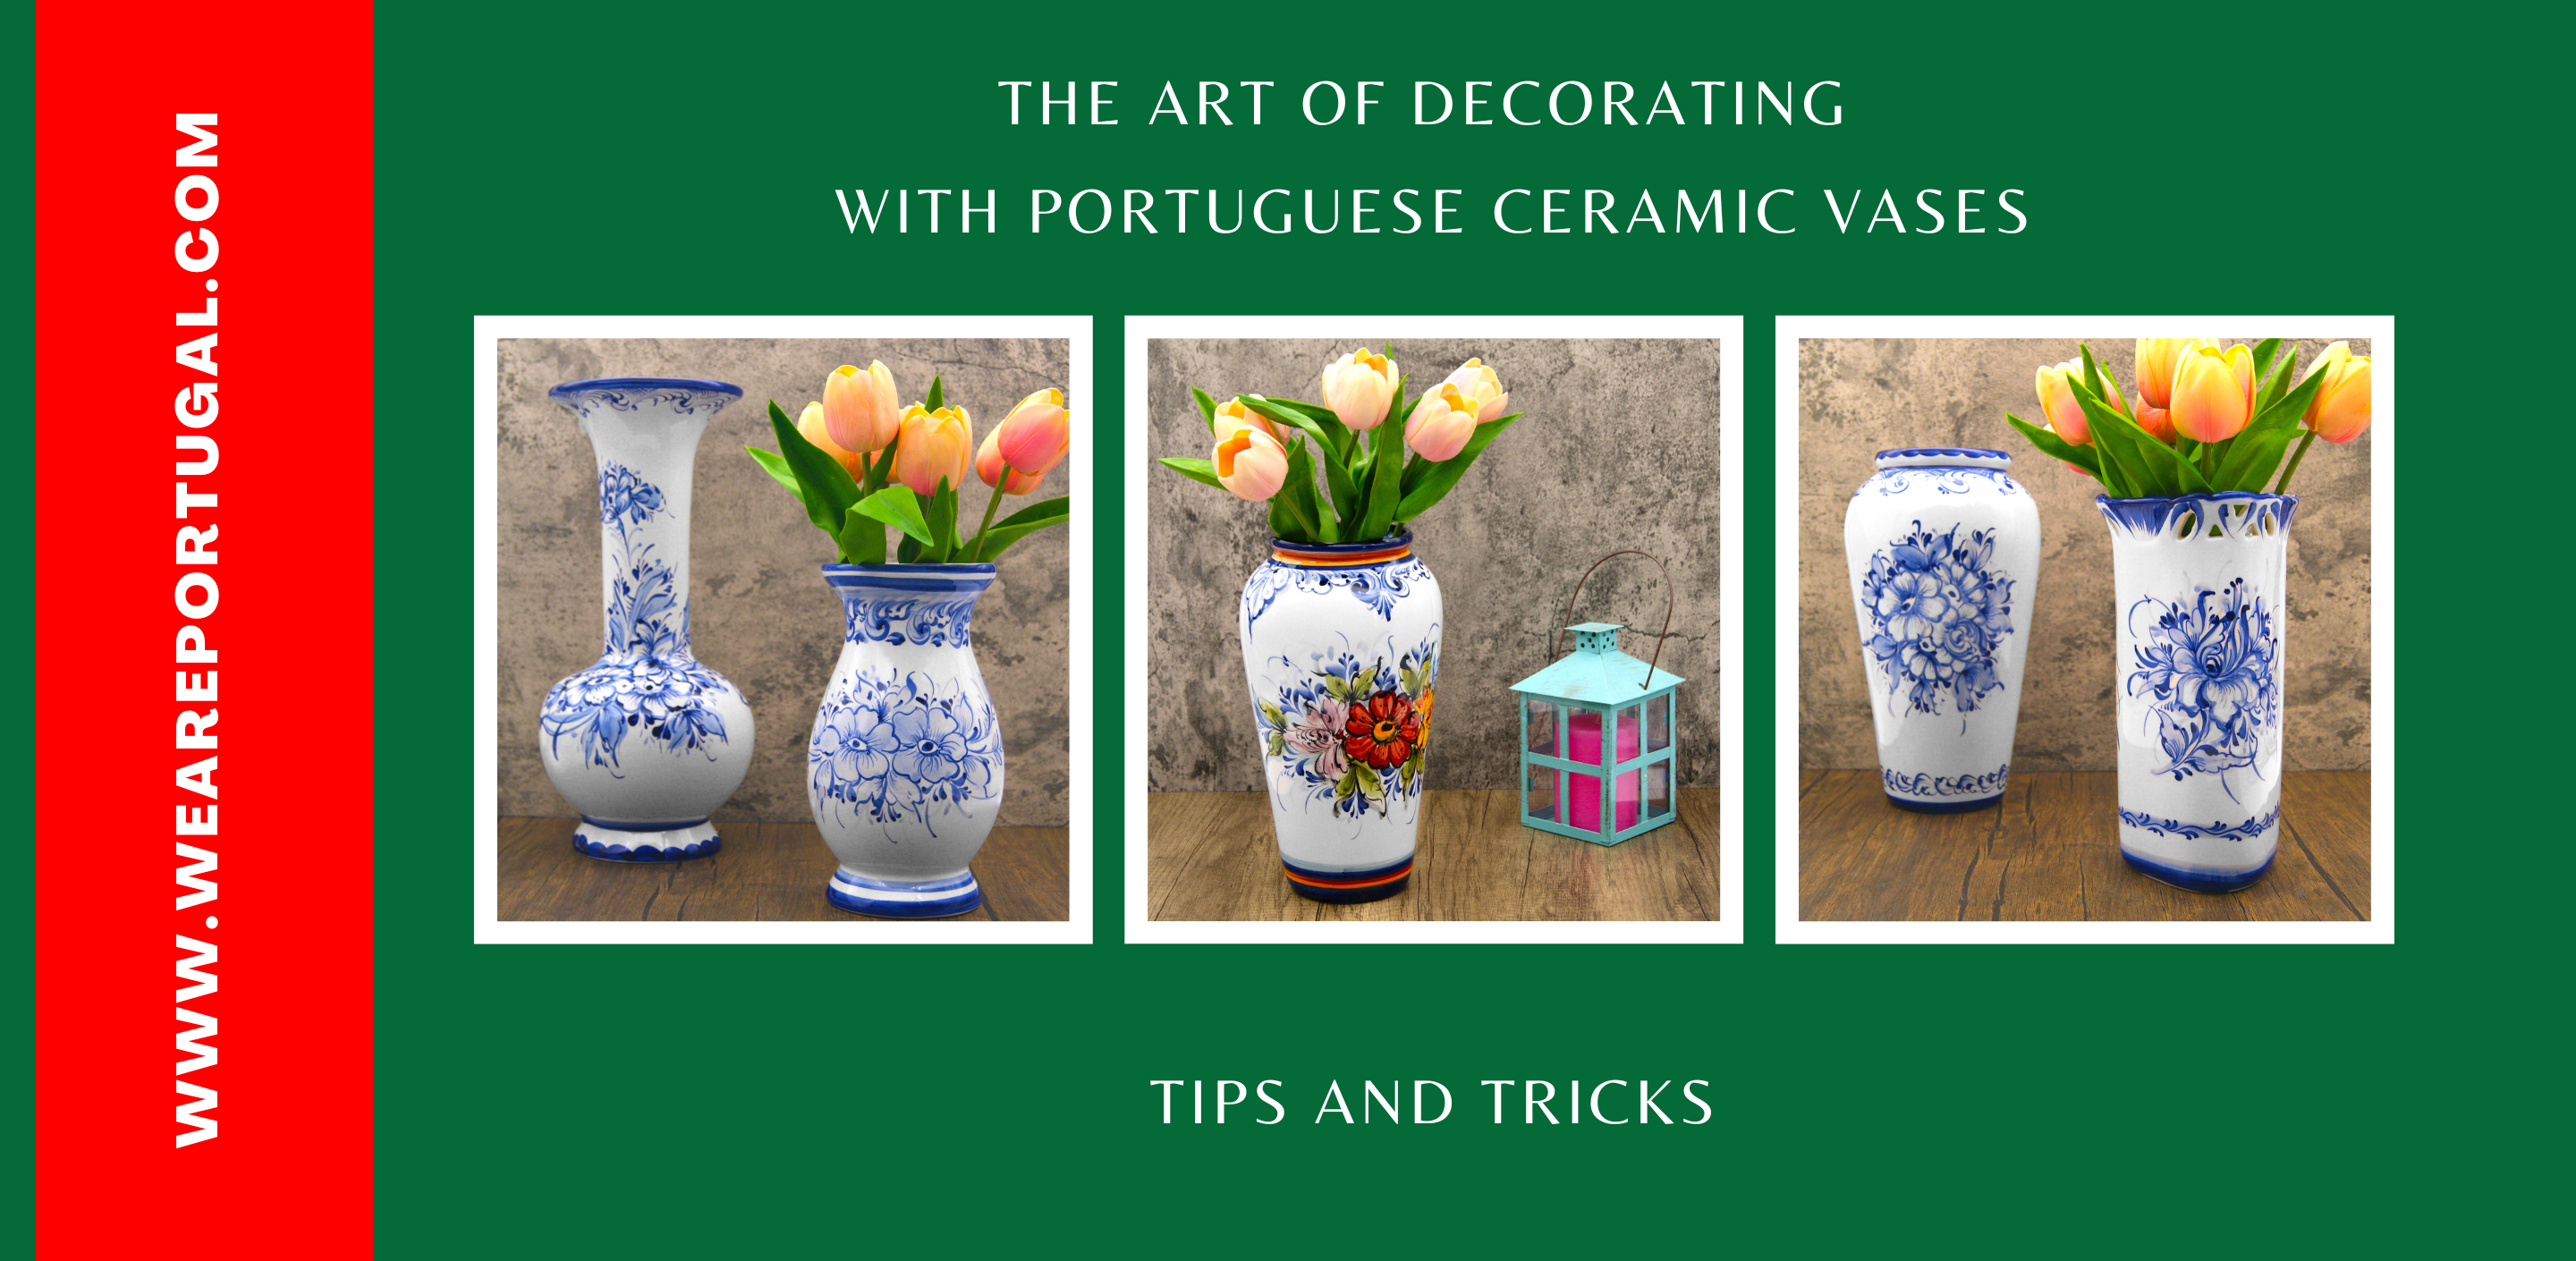 The Art of Decorating with Portuguese Ceramic Vases: Tips and Tricks